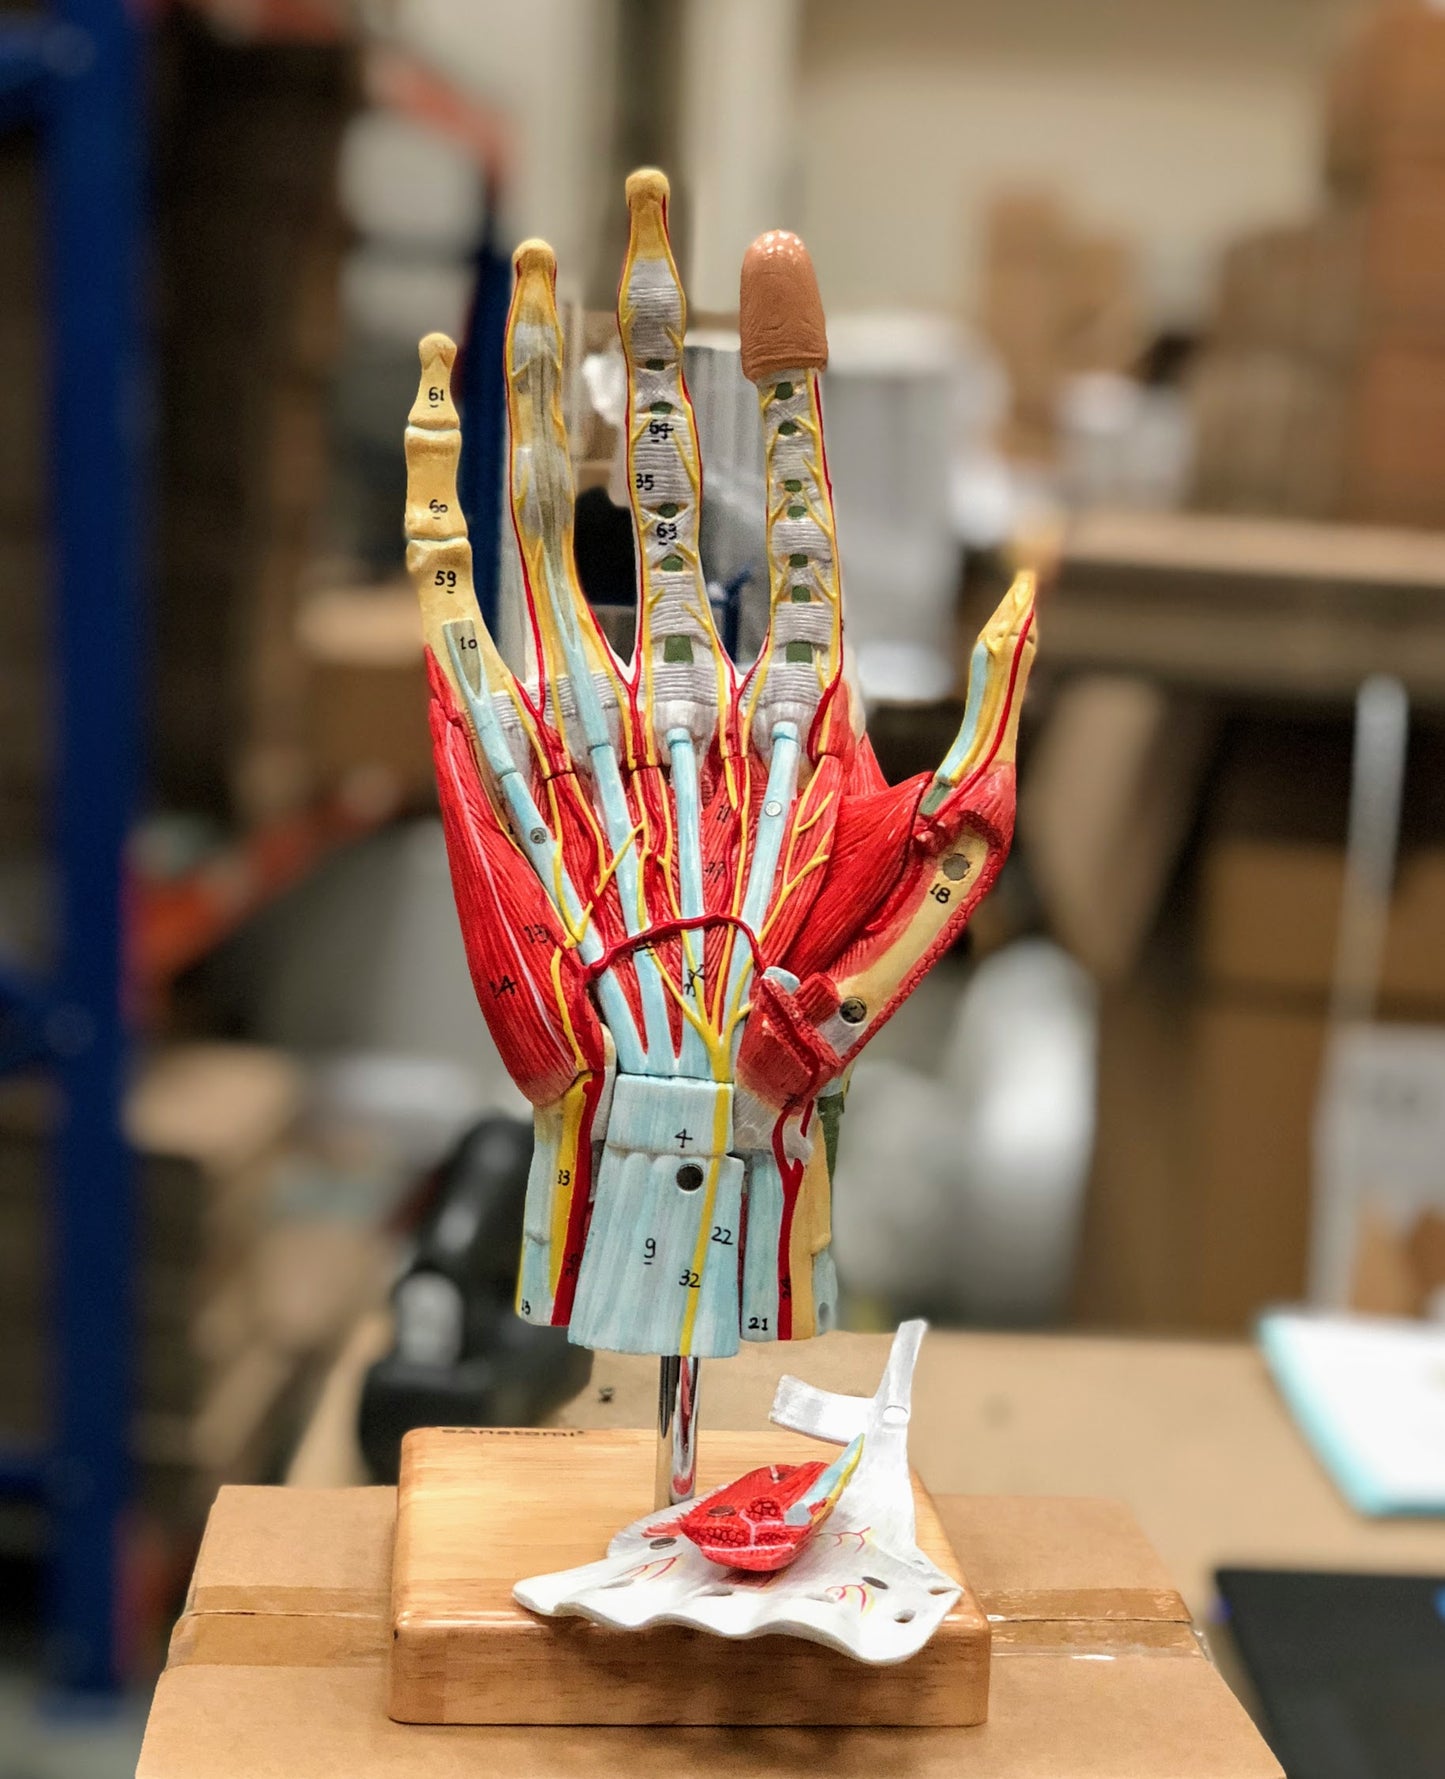 Complete hand model with muscles, tendons, vessels and nerves - can be separated into 7 parts